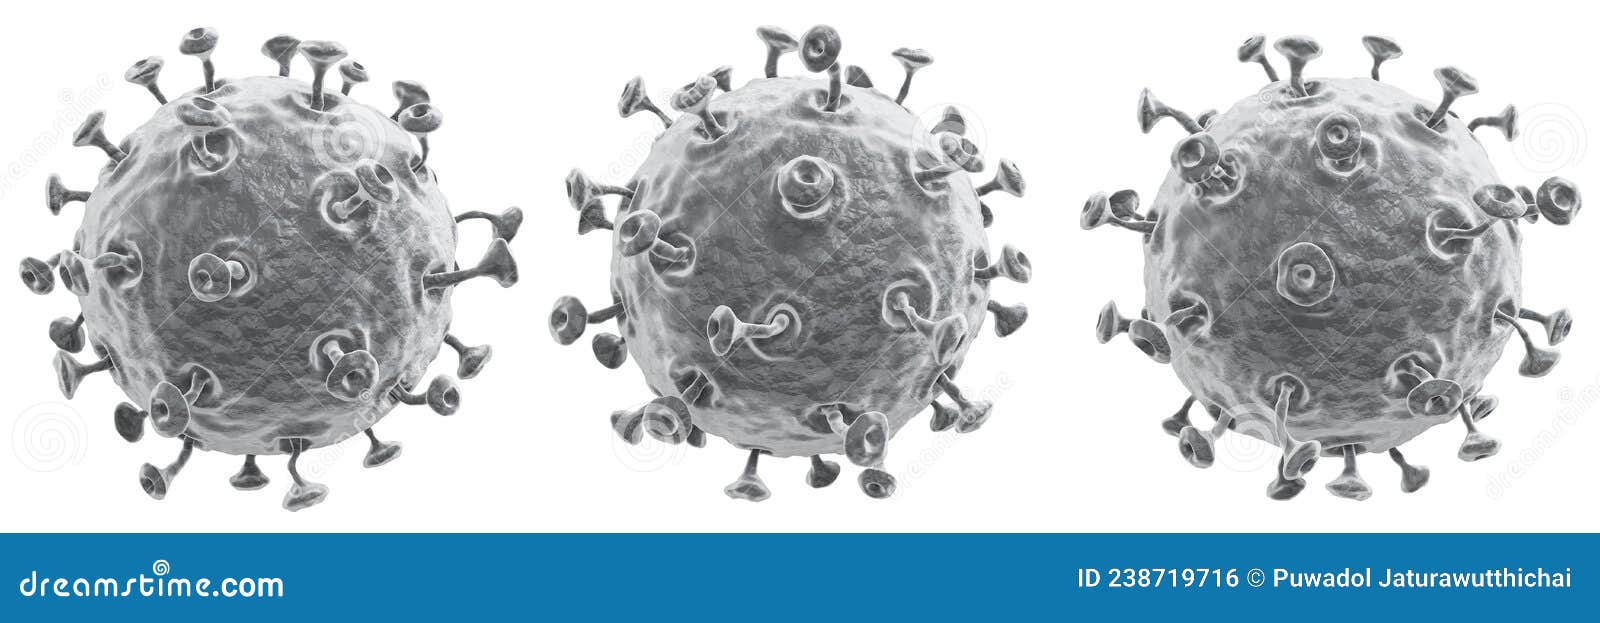 covid-19 . set of corona virus with high detail textured and glycoprotein spike . different view . white  background .